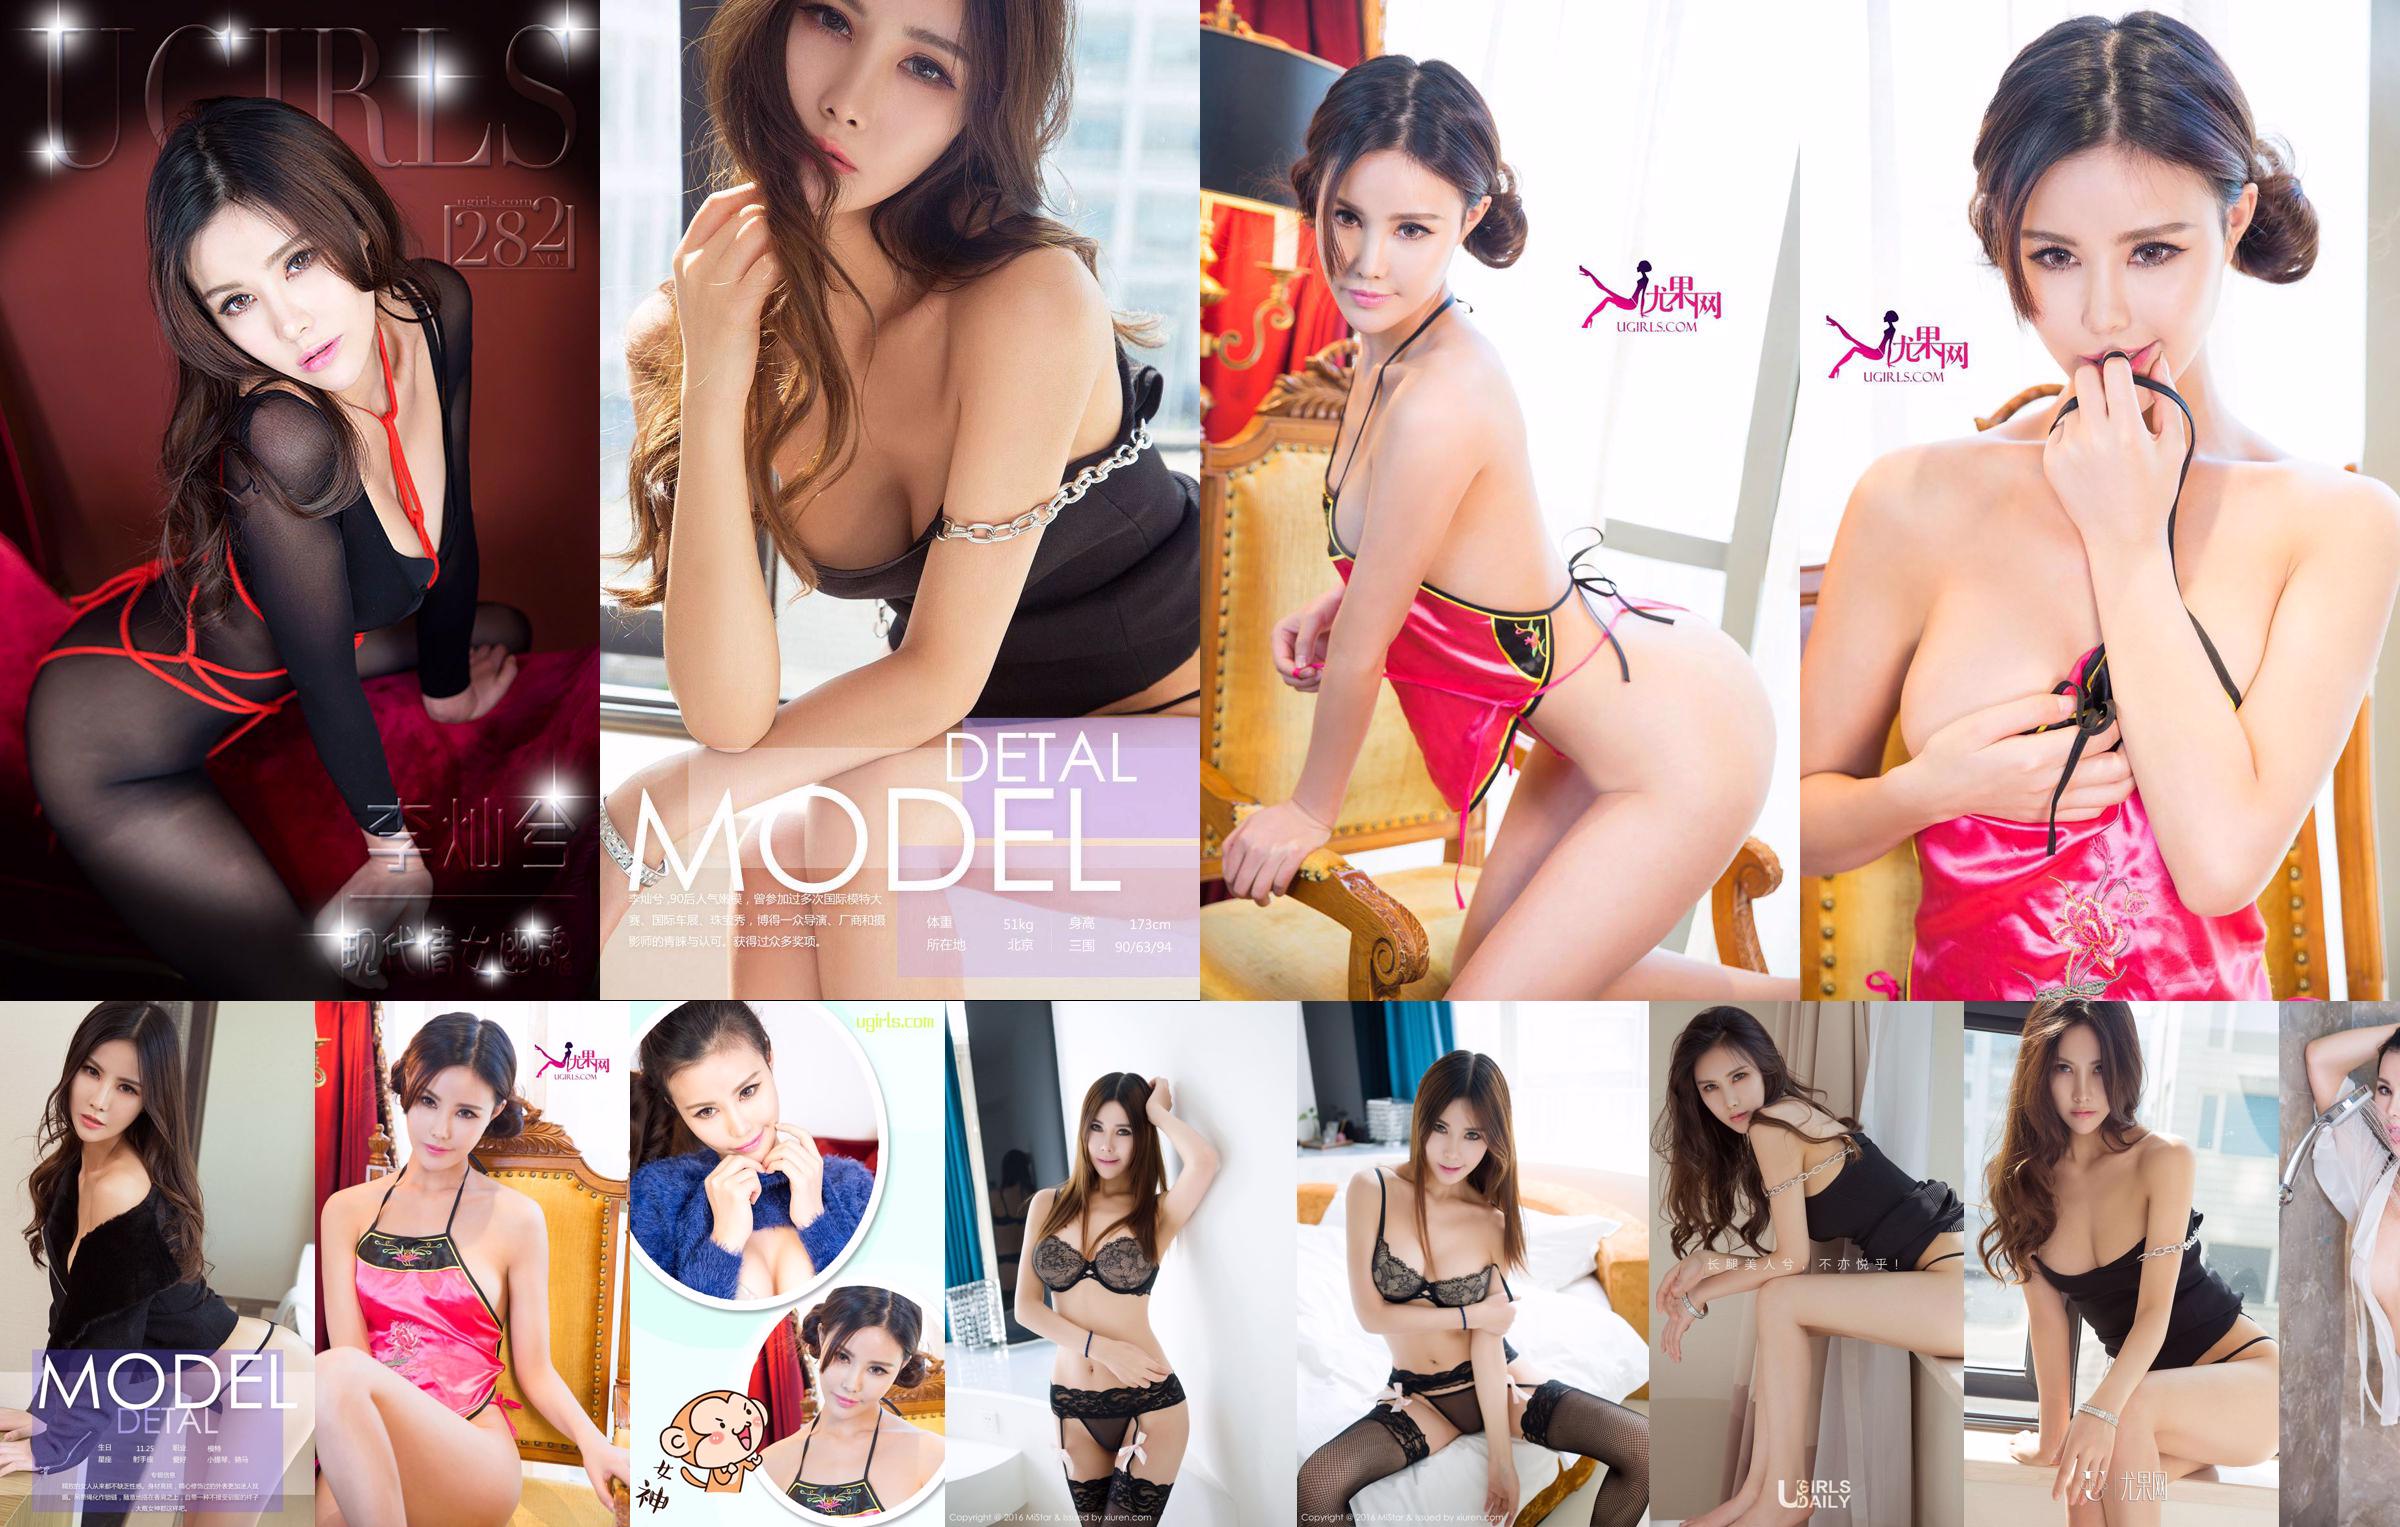 Canxi/Li Canxi "3 sets of sexy lingerie" [MiStar] Vol.097 No.1ae717 Page 1